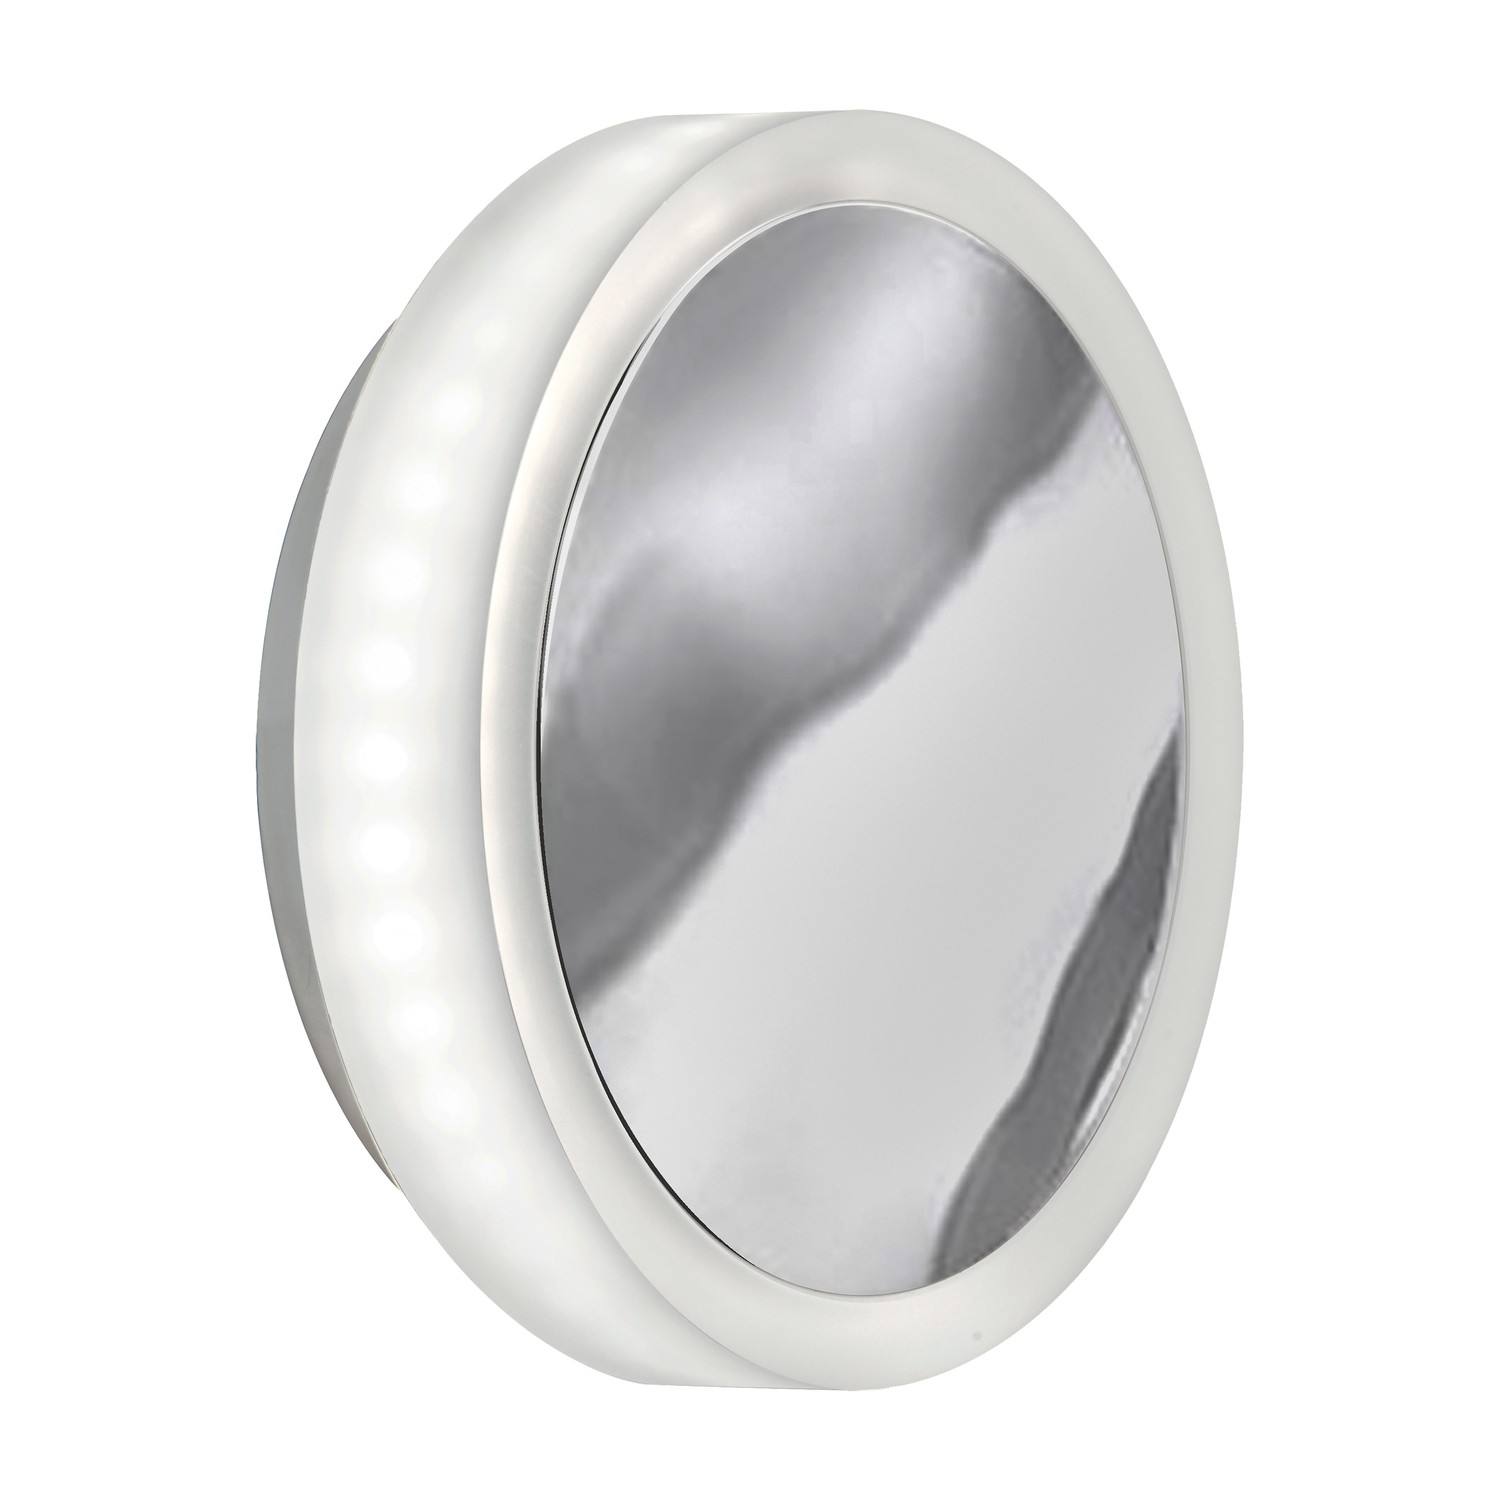 12W Polished Chrome Wall Sconce w/ Frosted Acrylic Diffuser